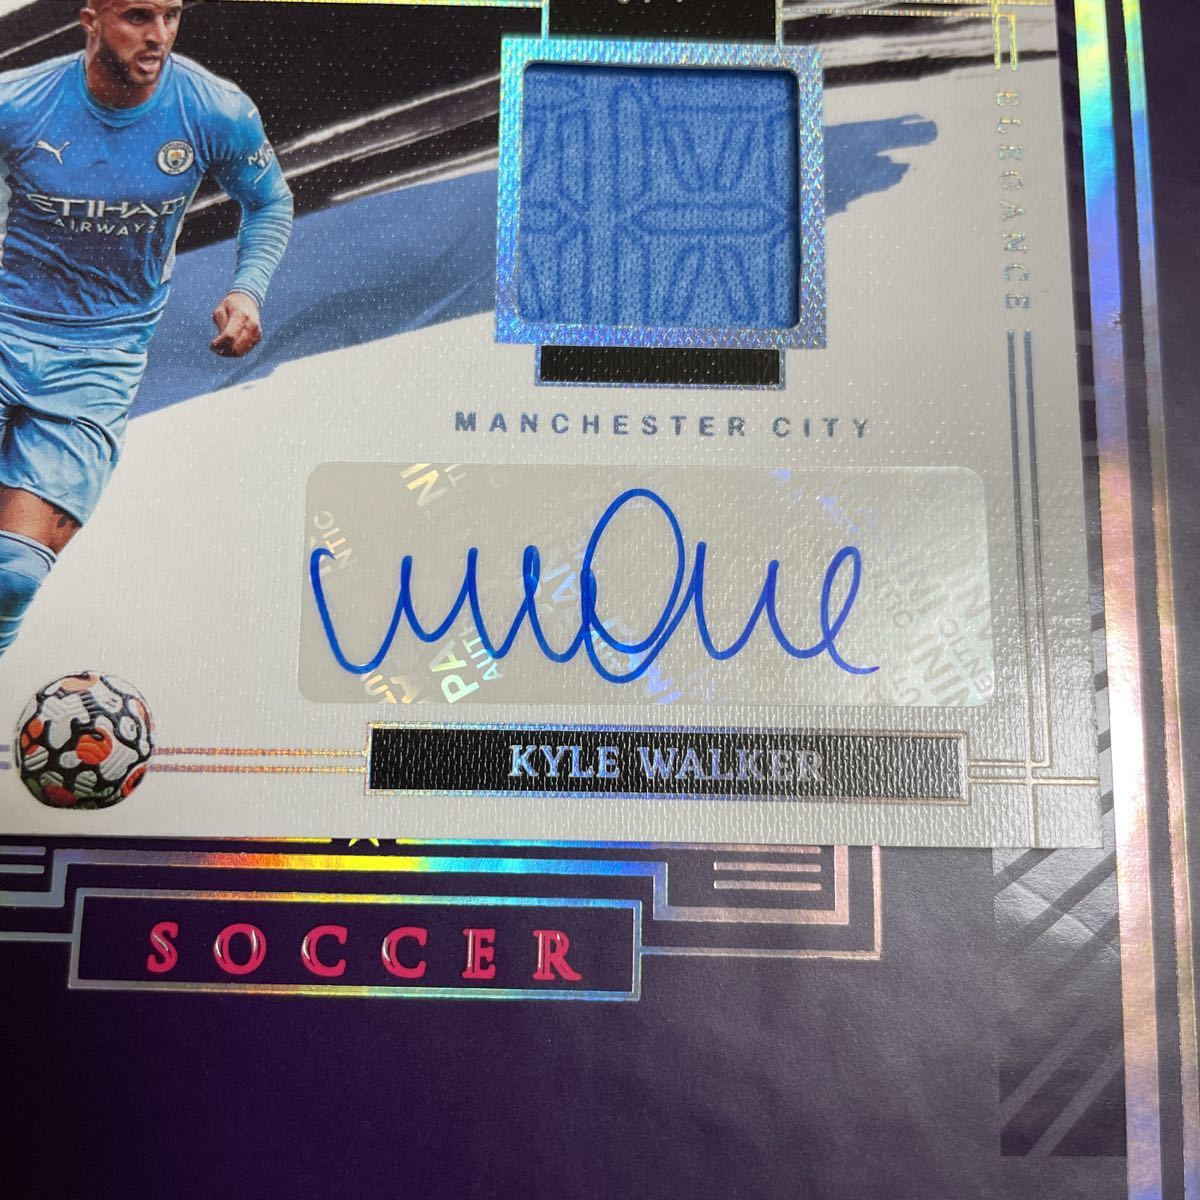 Panini impeccable soccer 2021-22 Manchester City /7 autograph Kyle Walker ウォーカー マンチェスターシティ _画像3